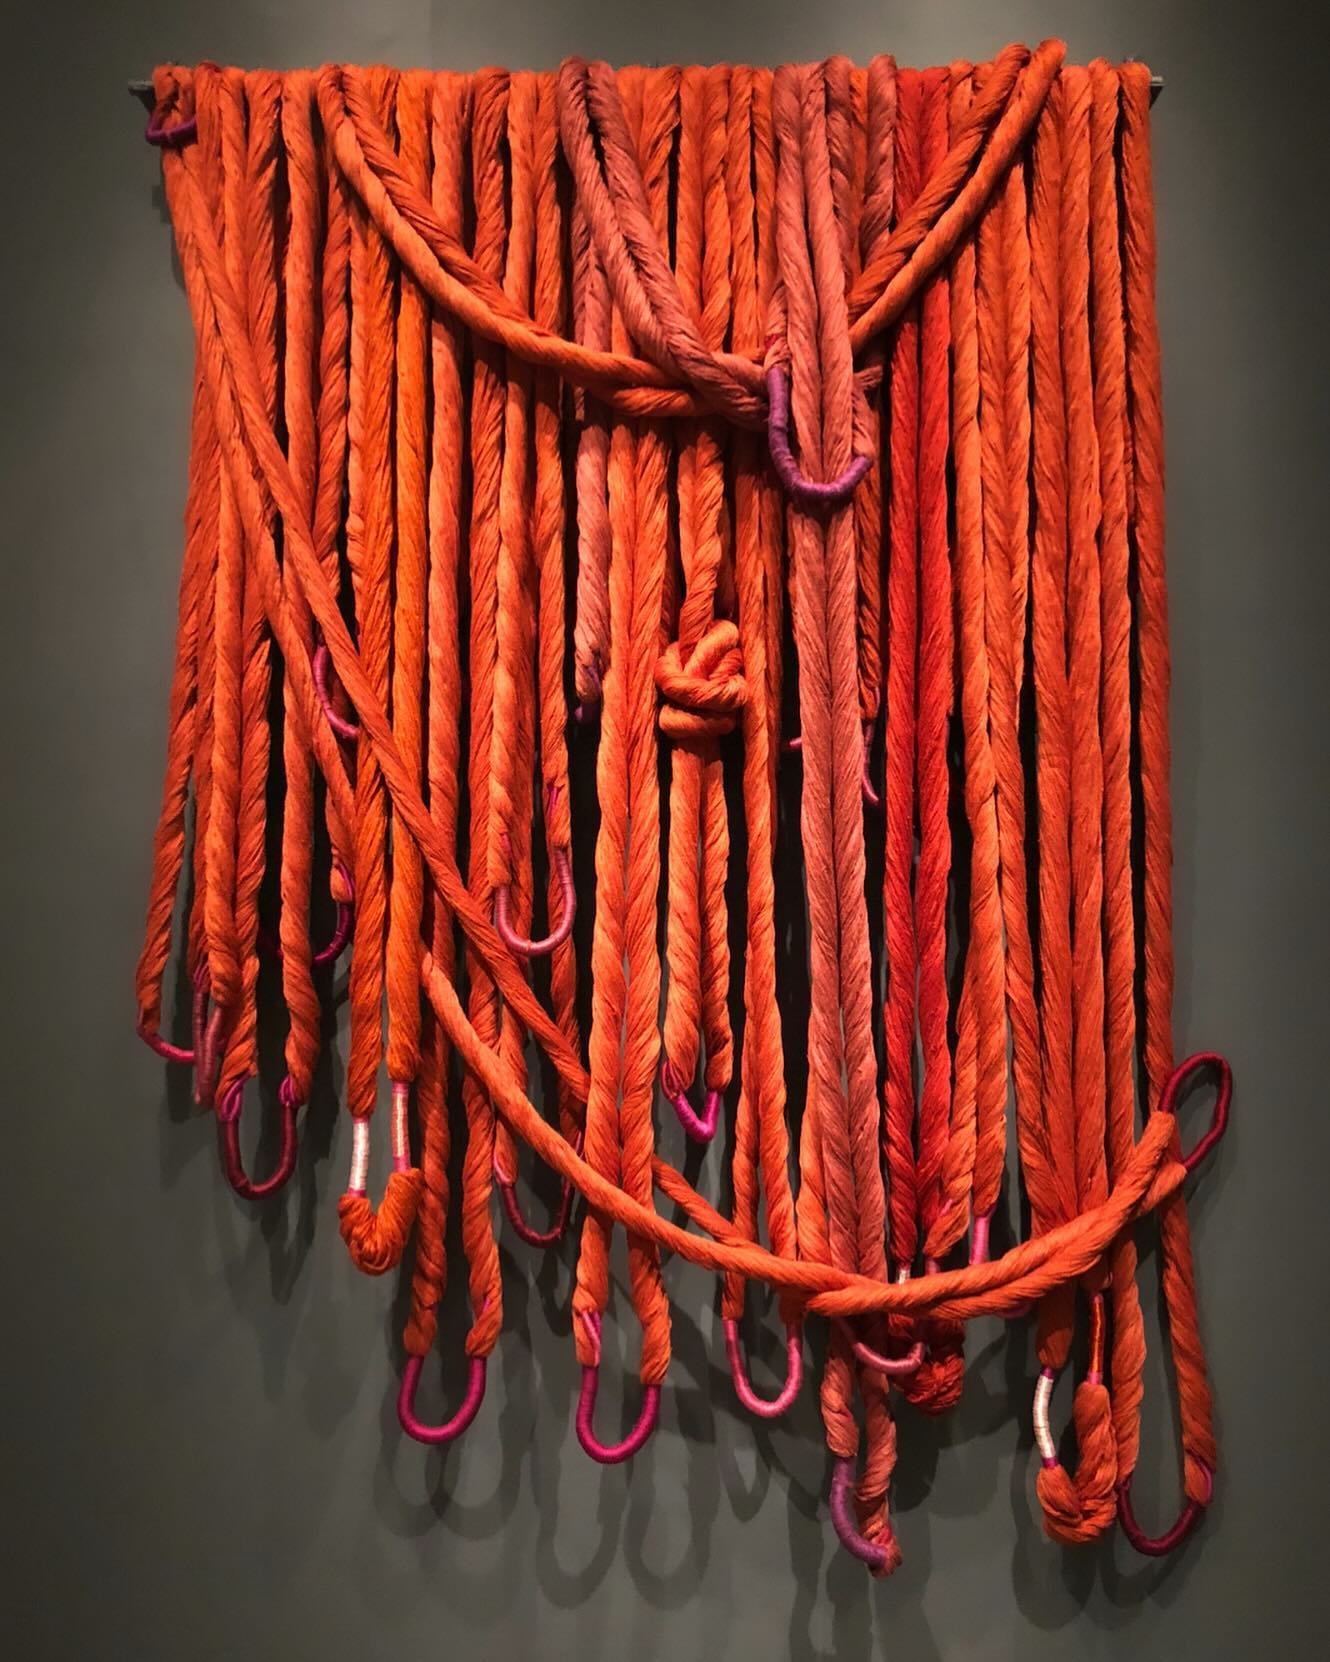 A number of people have asked how I got into working with textiles. The answer is Sheila Hicks. Specifically, the piece above, which I saw at the Cincinnati Art Museum a number of years ago. 

This piece is huge, taking up an entire wall, and it took